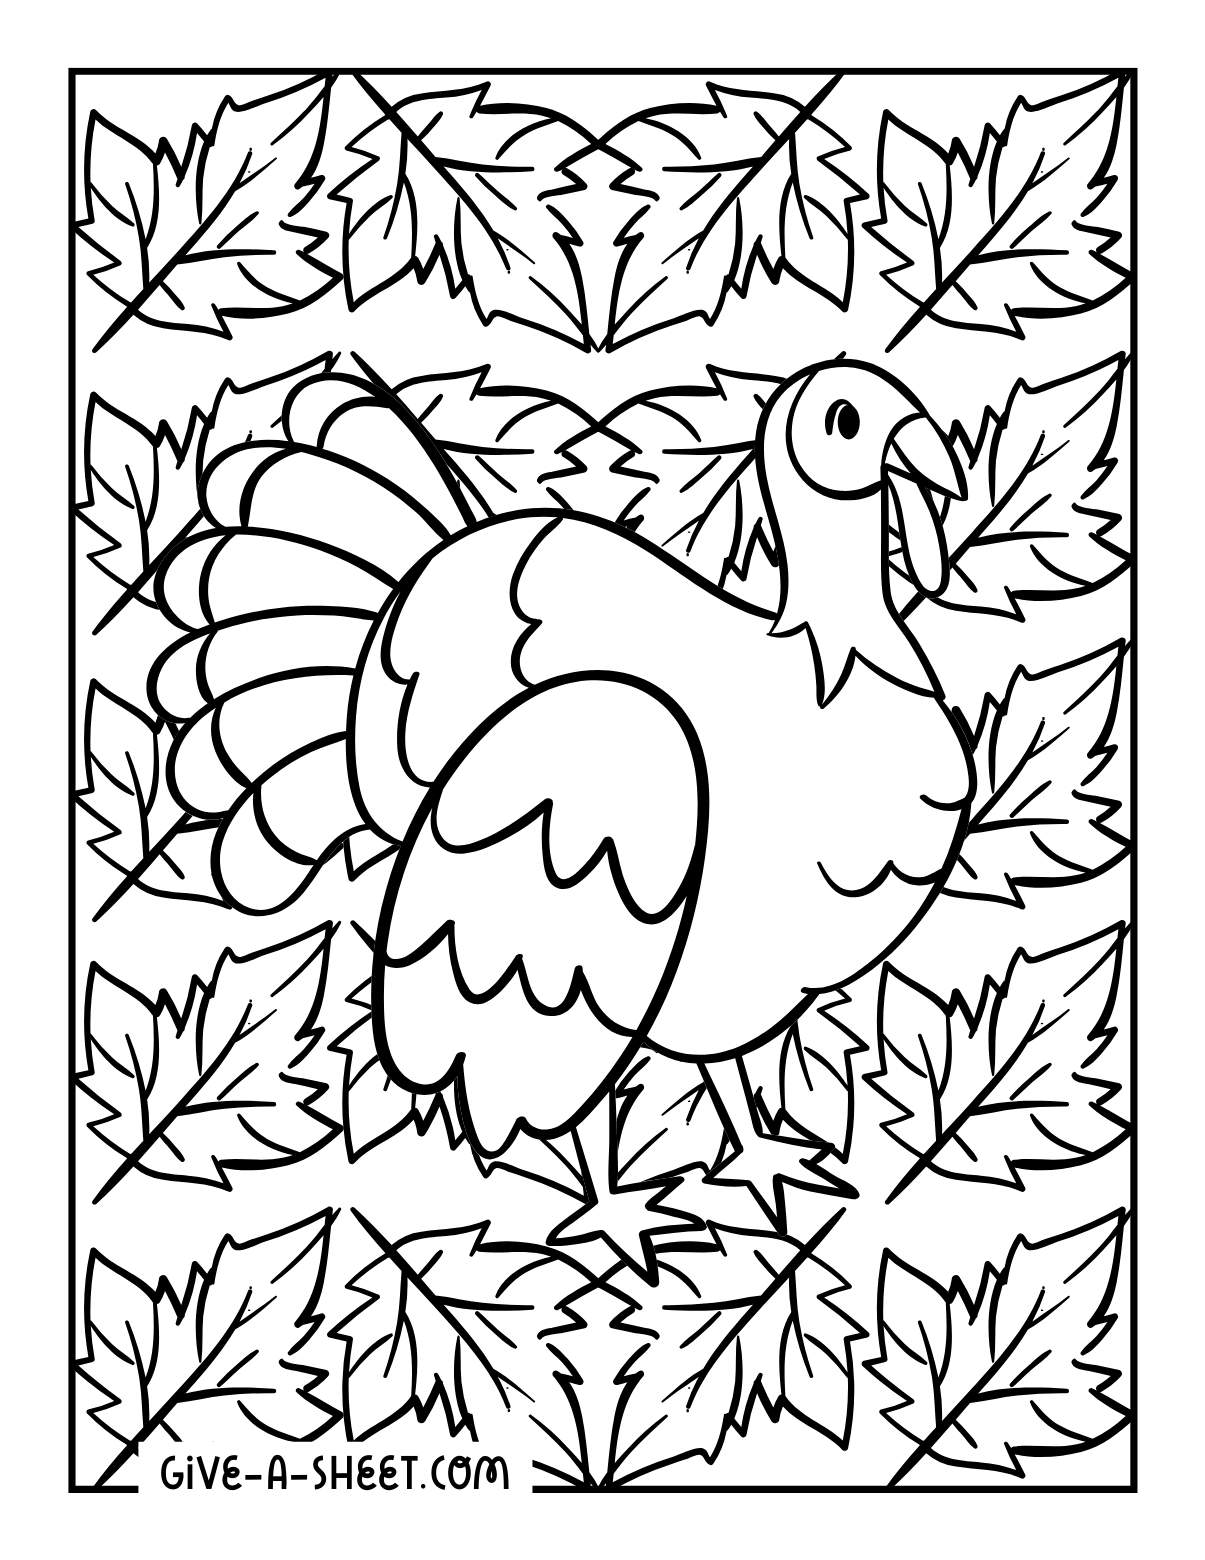 Fall leaves turkey coloring page.